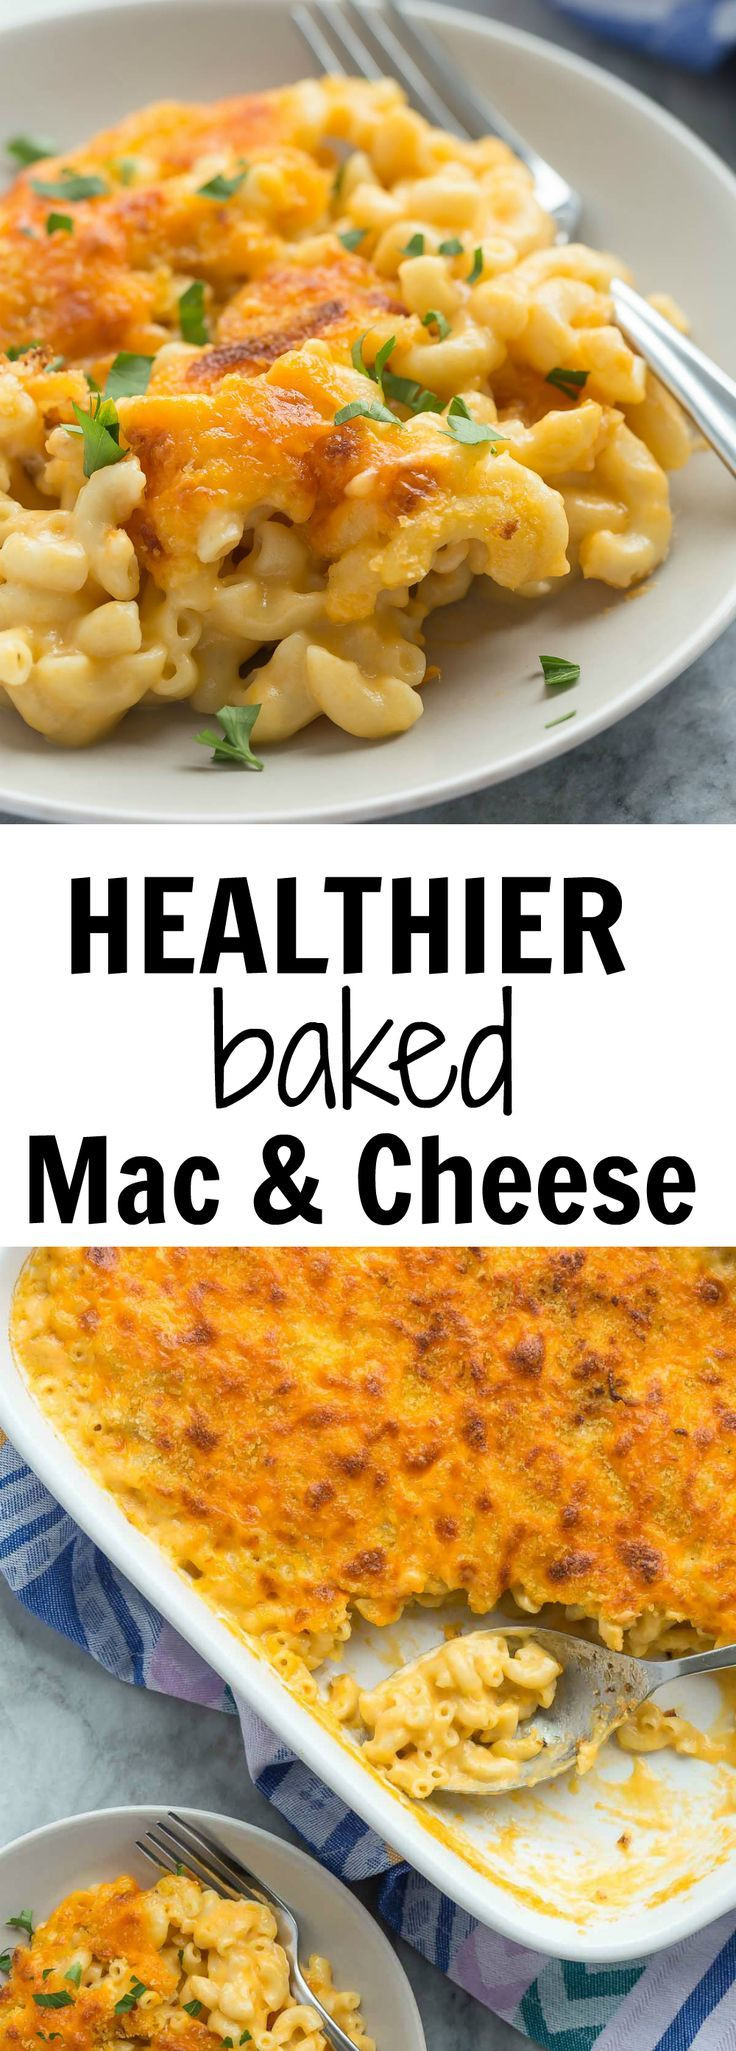 Low Fat Mac And Cheese Recipes
 Pin on RECIPES Macaroni & Cheese